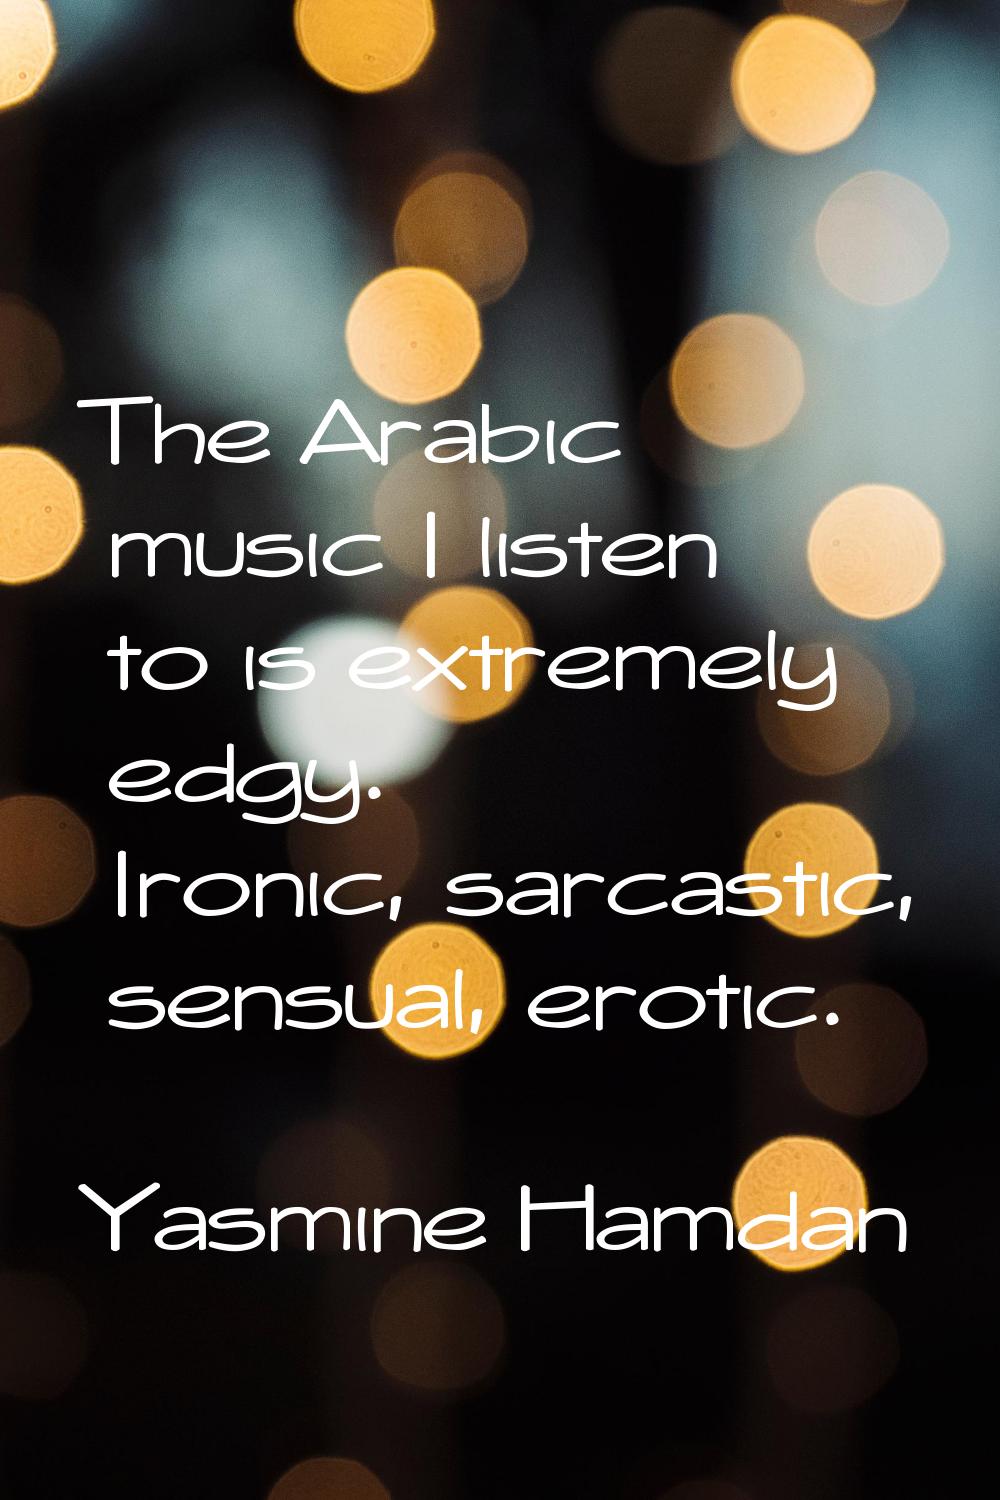 The Arabic music I listen to is extremely edgy. Ironic, sarcastic, sensual, erotic.